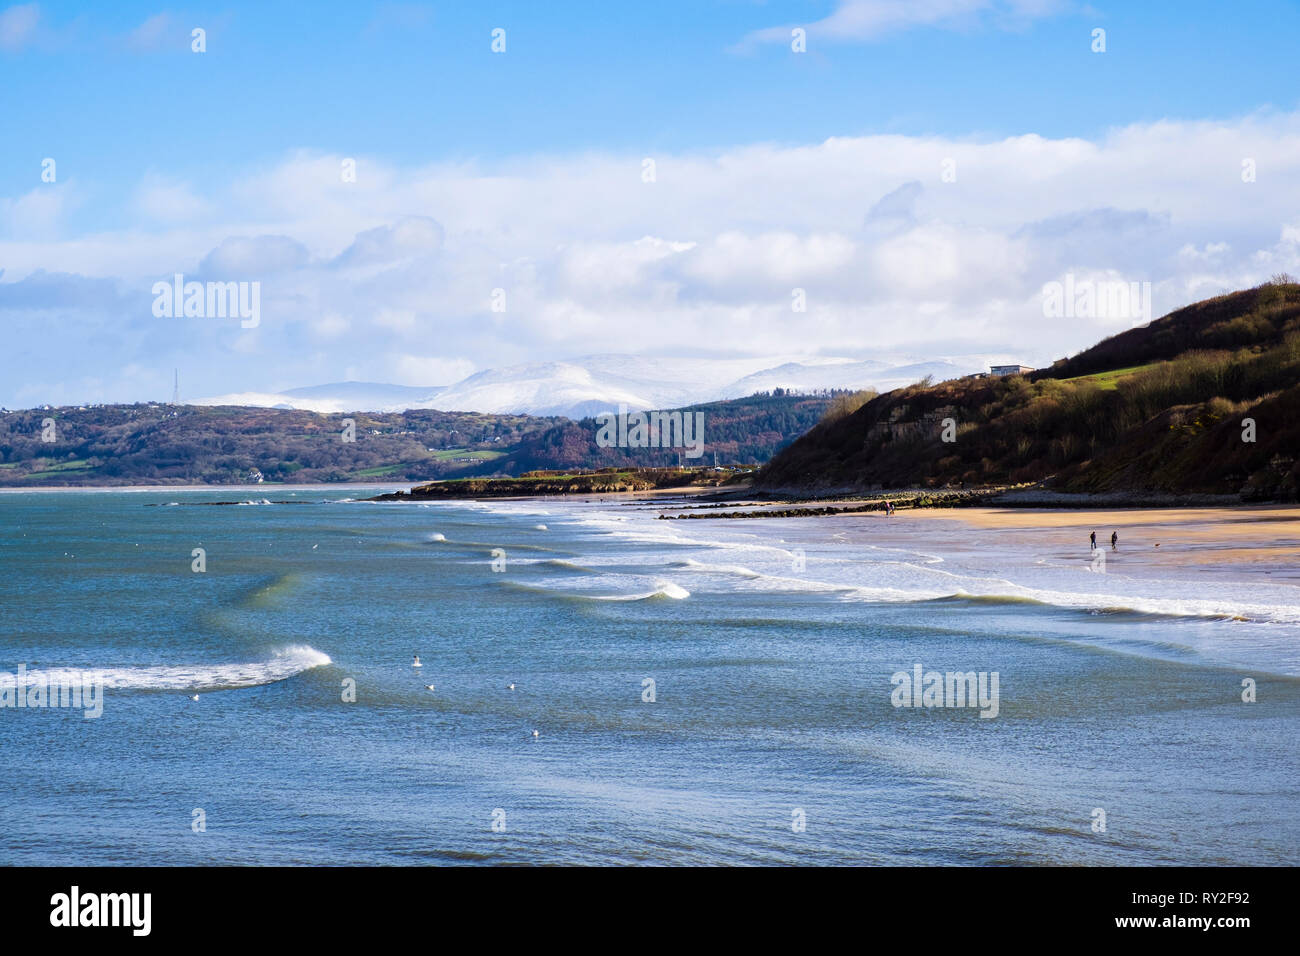 View across Benllech Bay and beach in sunshine with snow on distant mountains of Snowdonia. Benllech, Isle of Anglesey, North Wales, UK, Britain Stock Photo